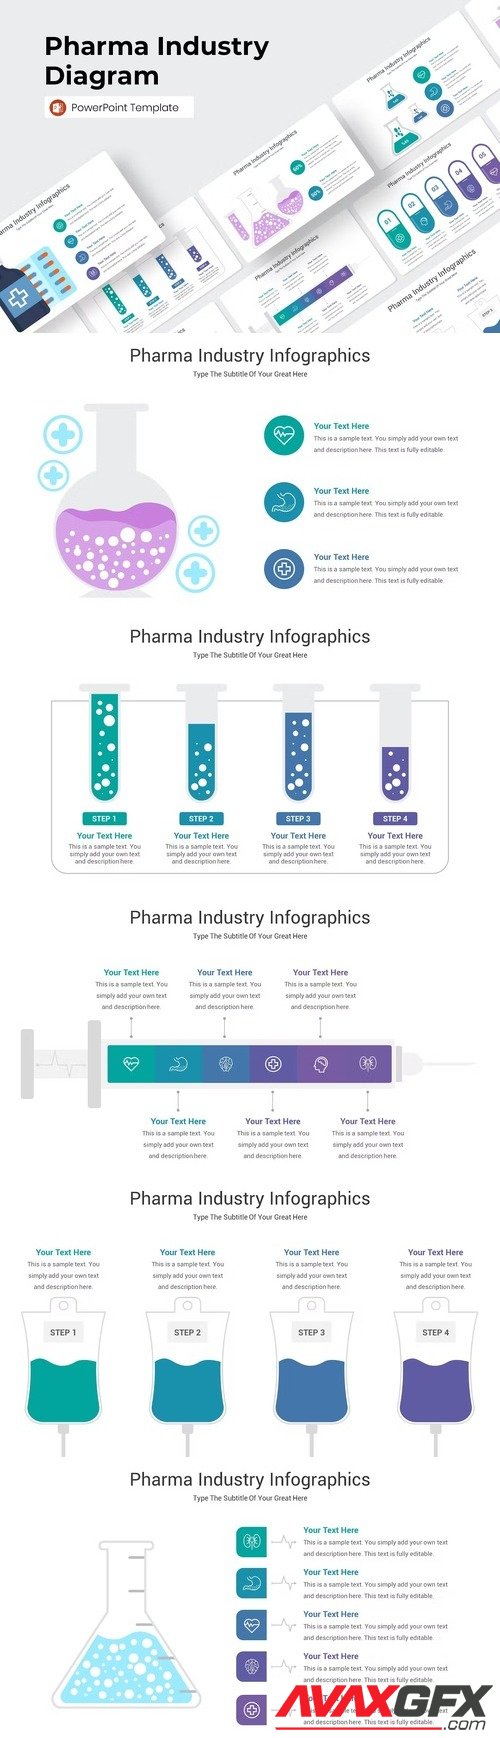 Pharma Industry Diagram PowerPoint Template [PPTX]